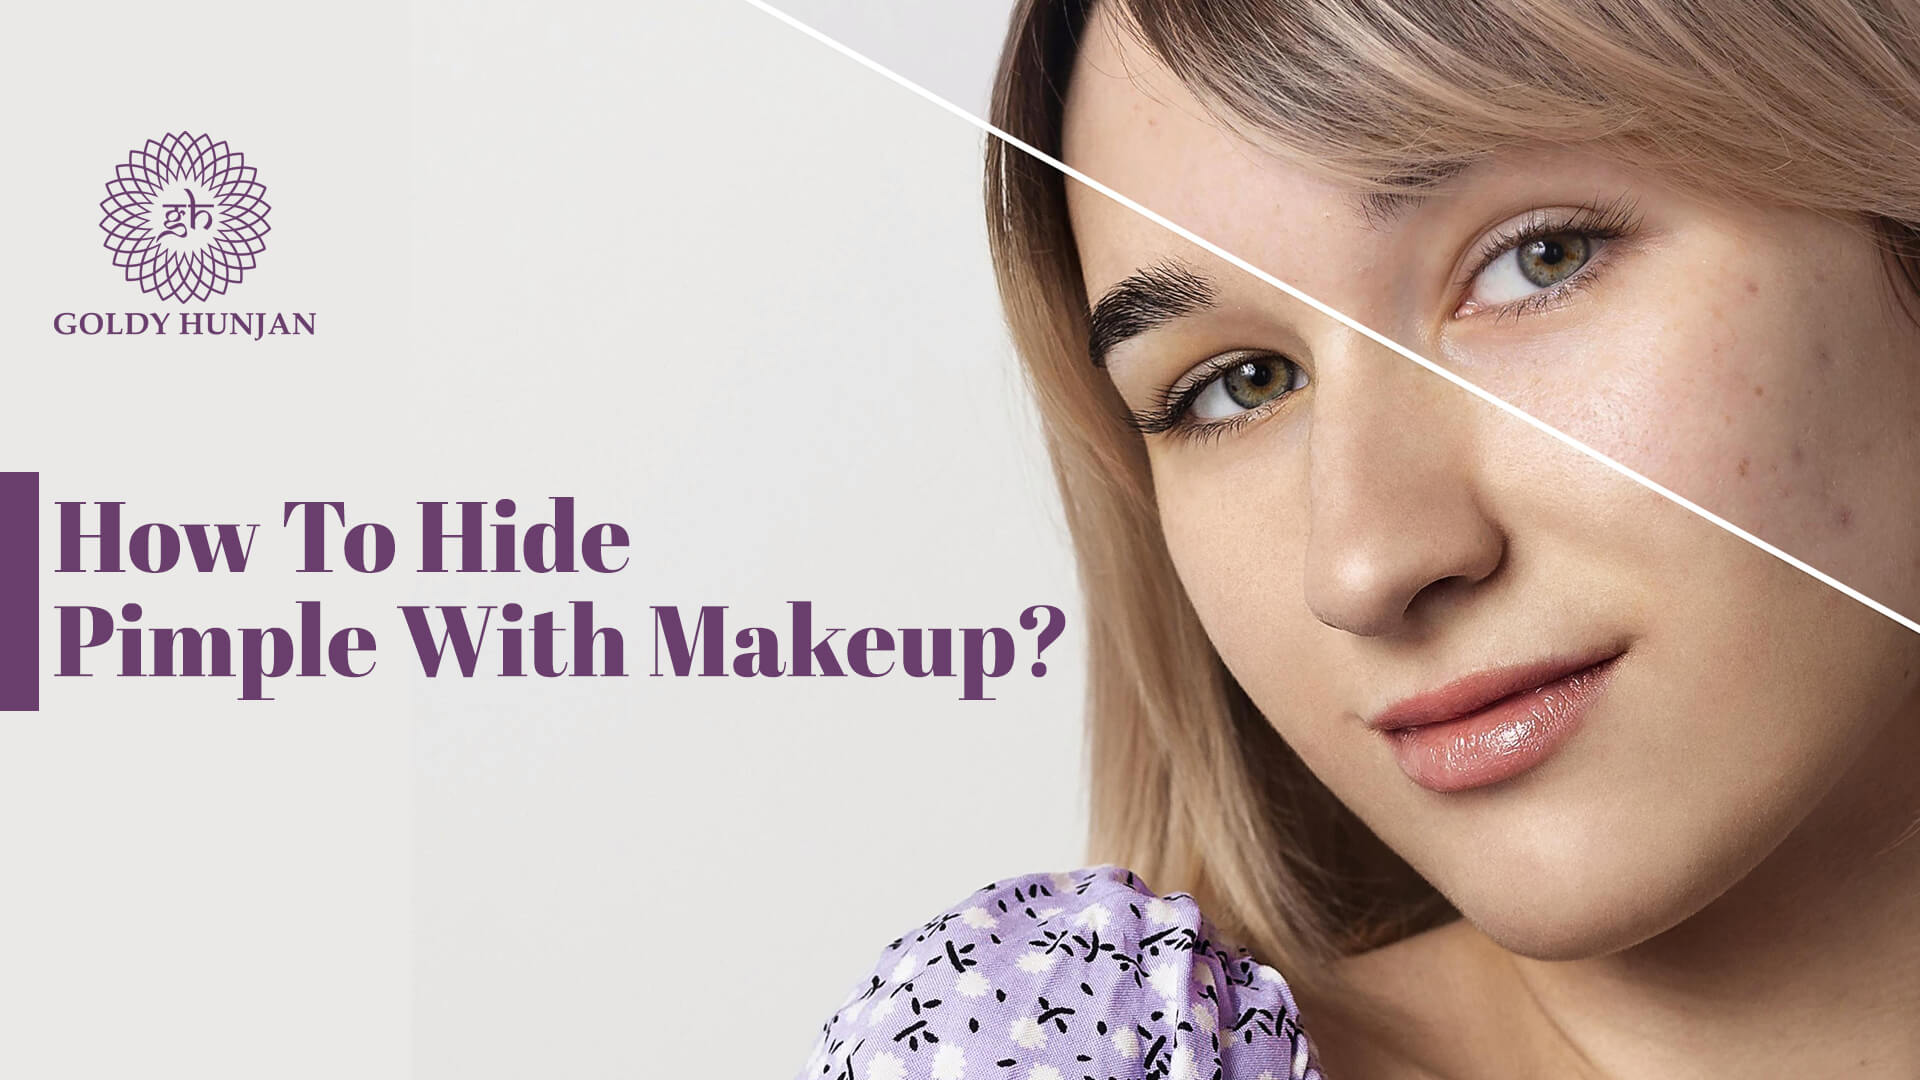 How to hide pimple with makeup